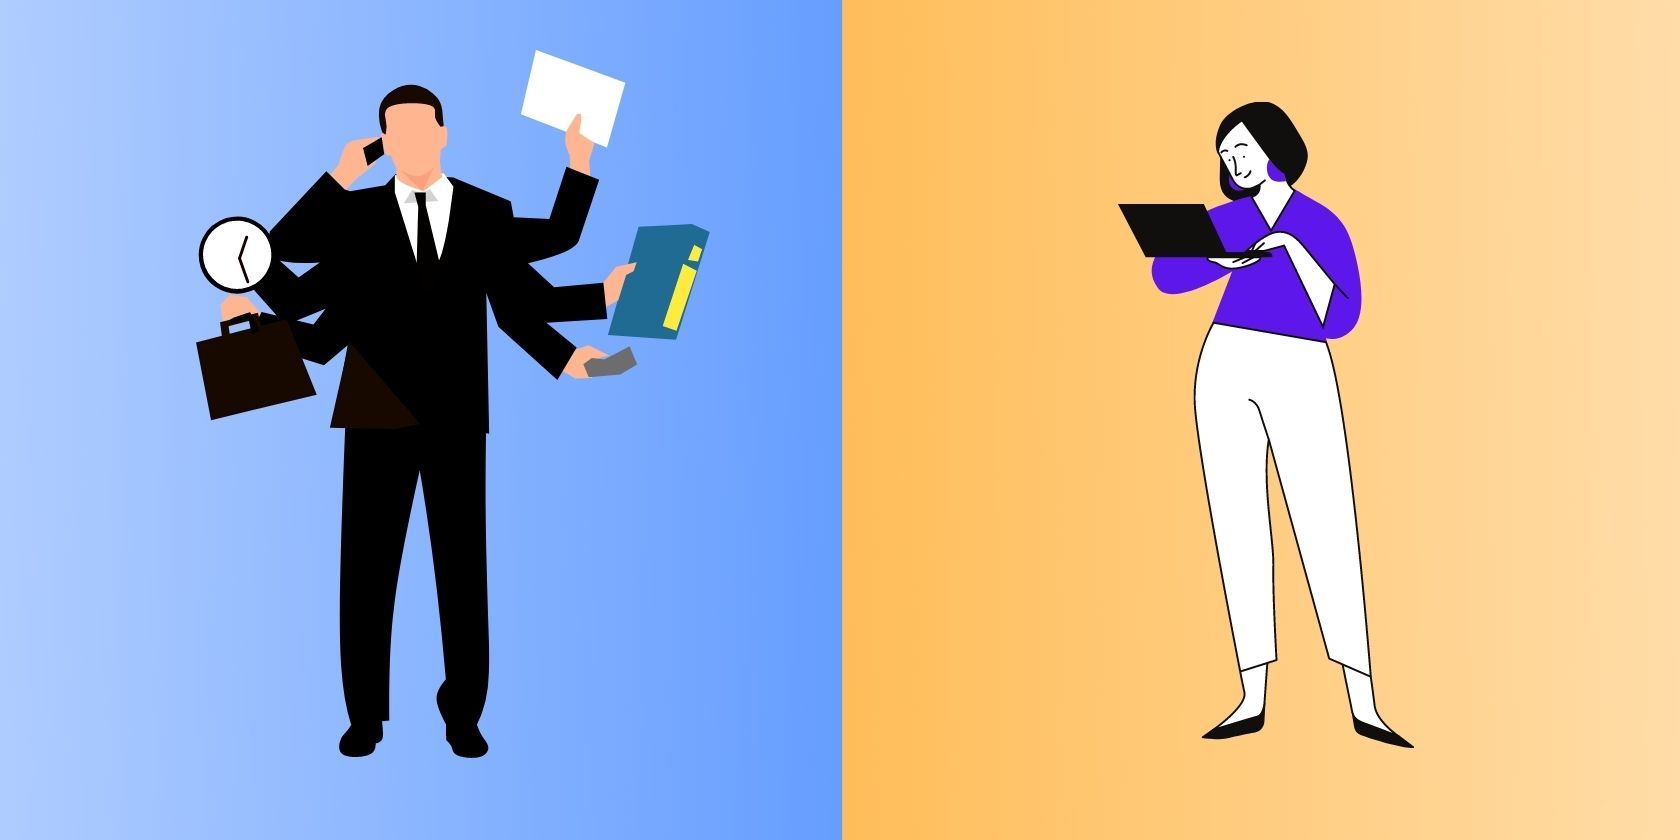 A vector image of two people side by side working